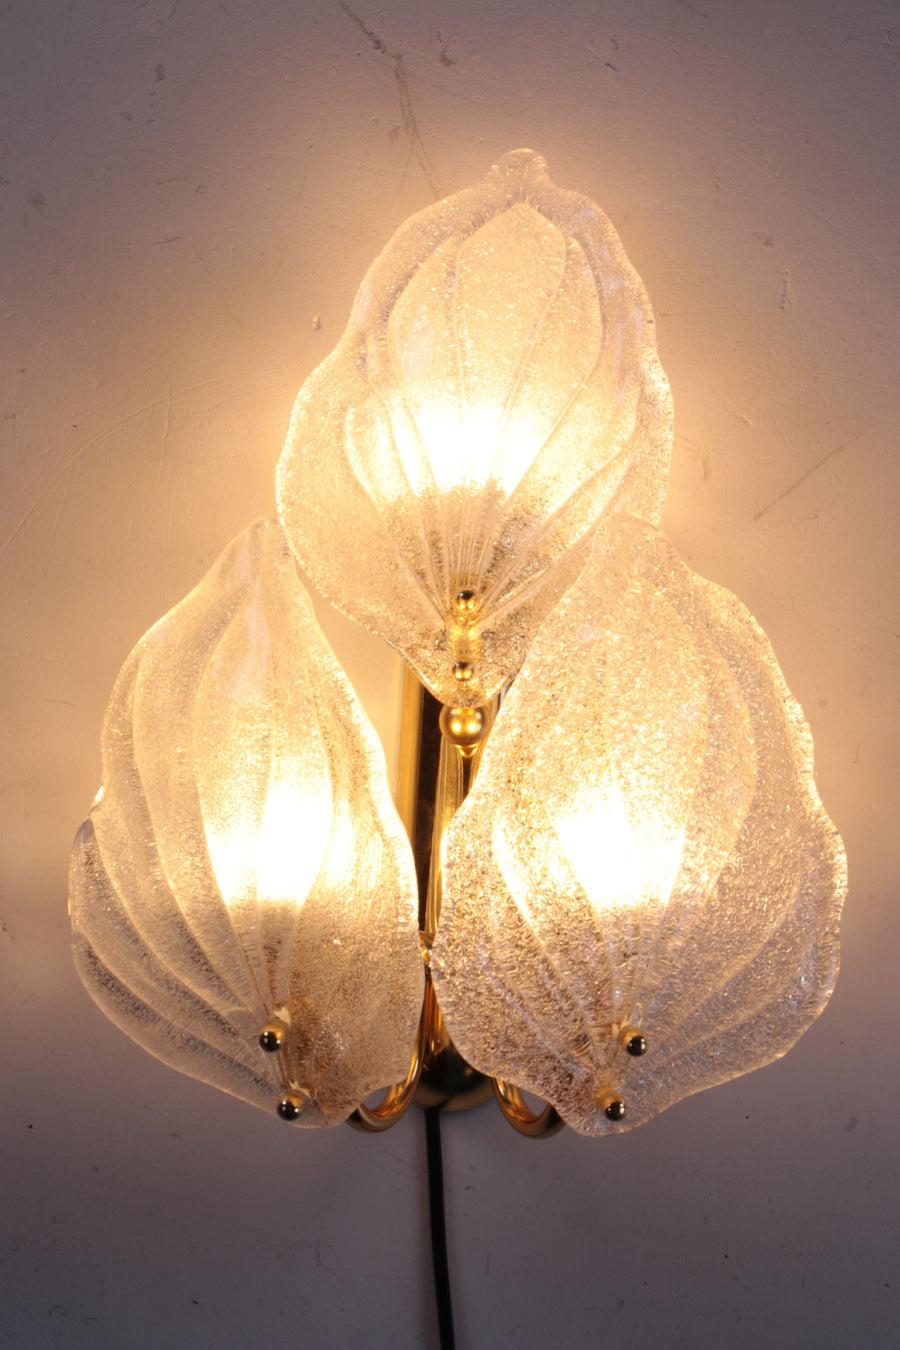 Italian Wall Lamp 24 Kt Gold Plated Novaresi

This Murano glass top built-in was produced in the 1970s

by Novaresi in Milan, Italy.

It has leaves in white textured glass on a gilt frame.

The lamp requires 3 E14 fittings small lamps.
Maker